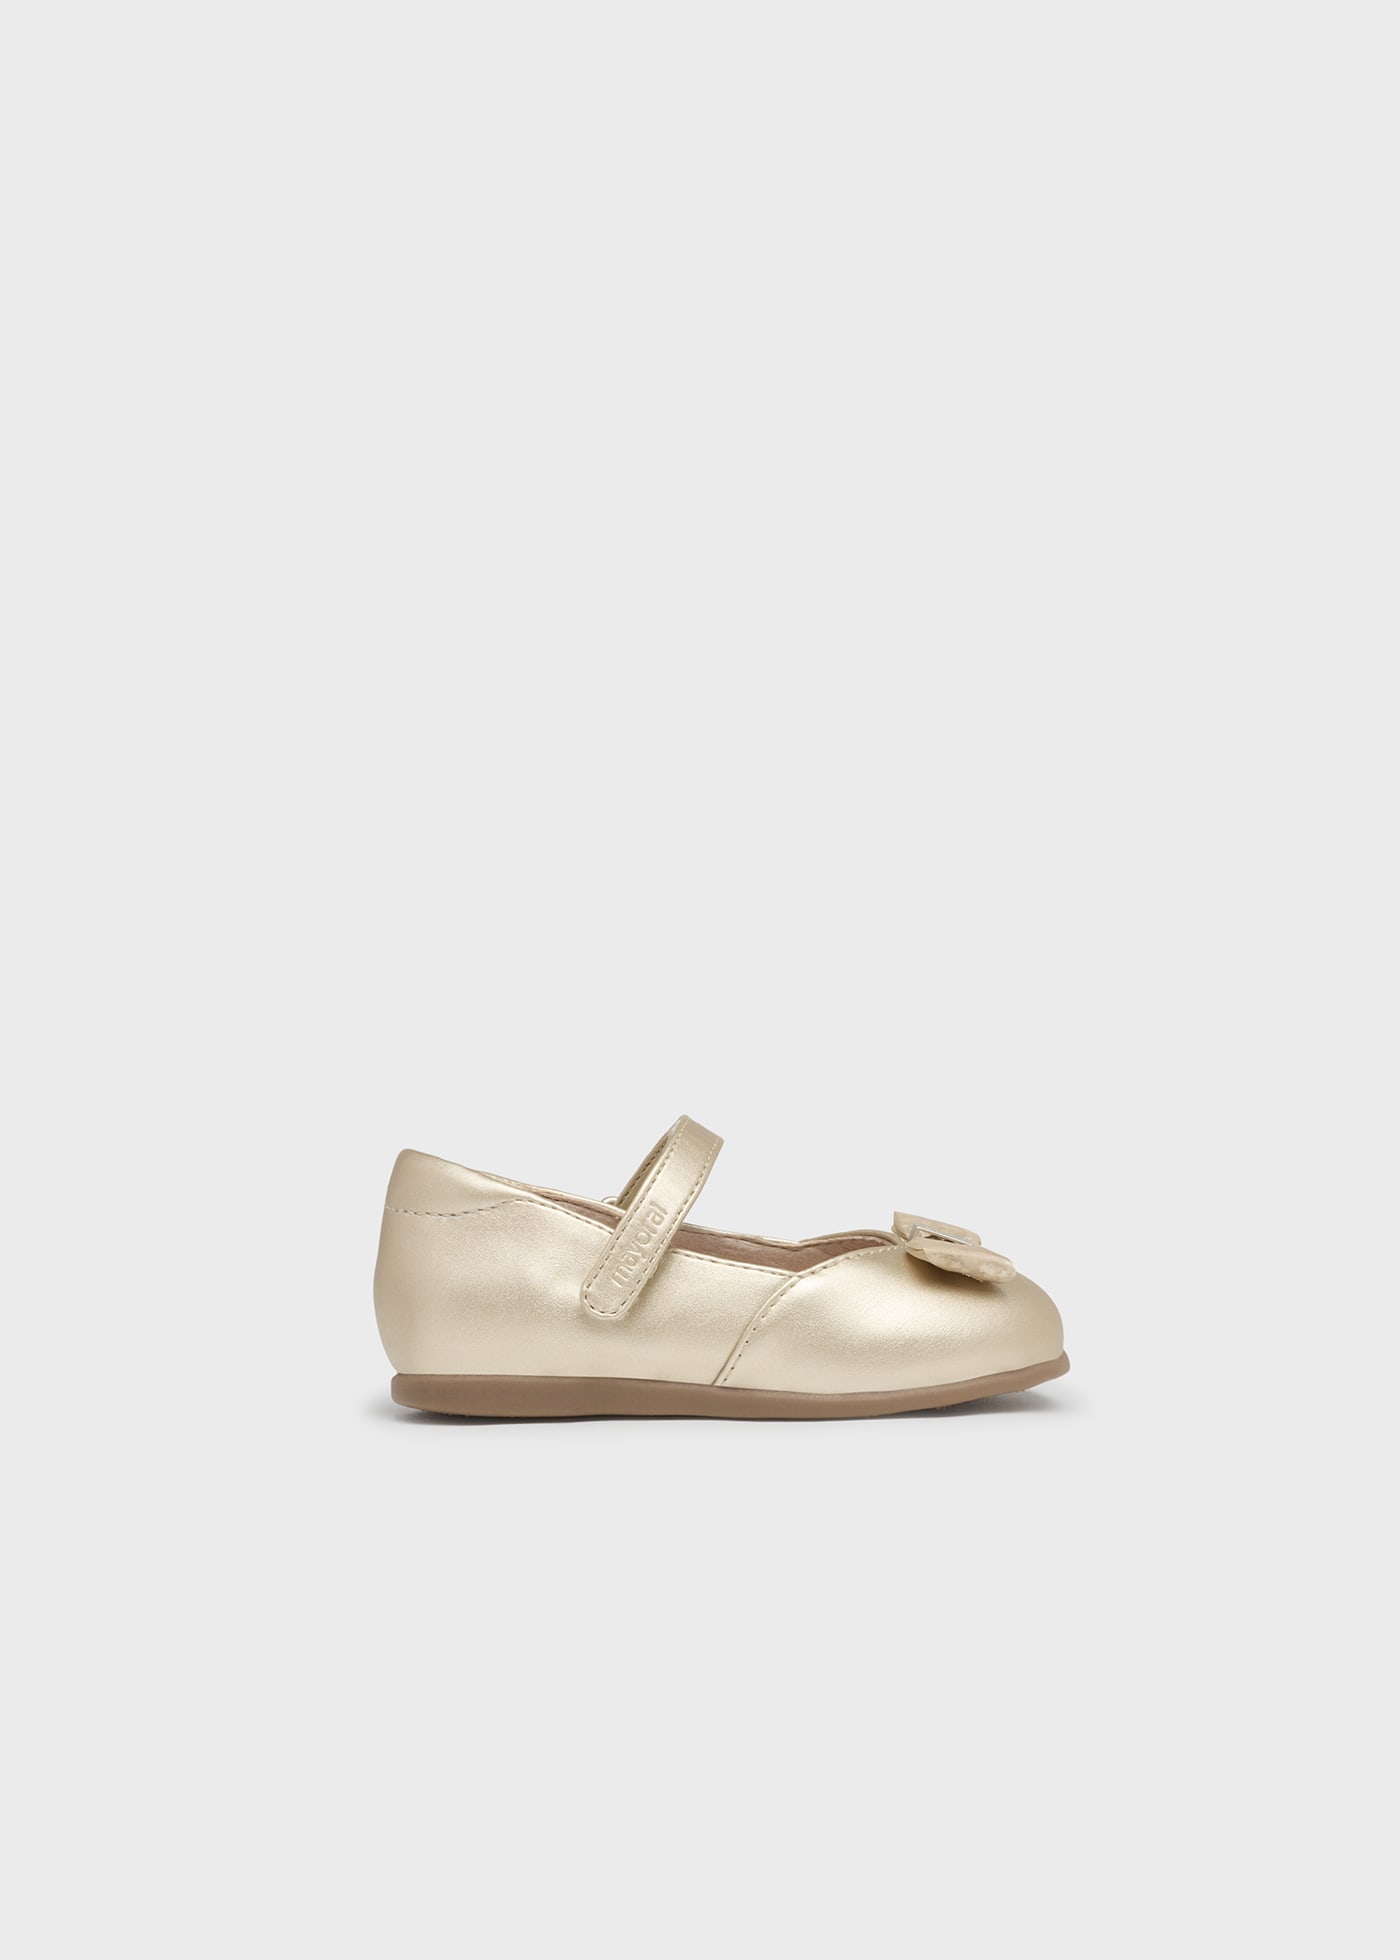 Bow mary janes sustainable leather baby